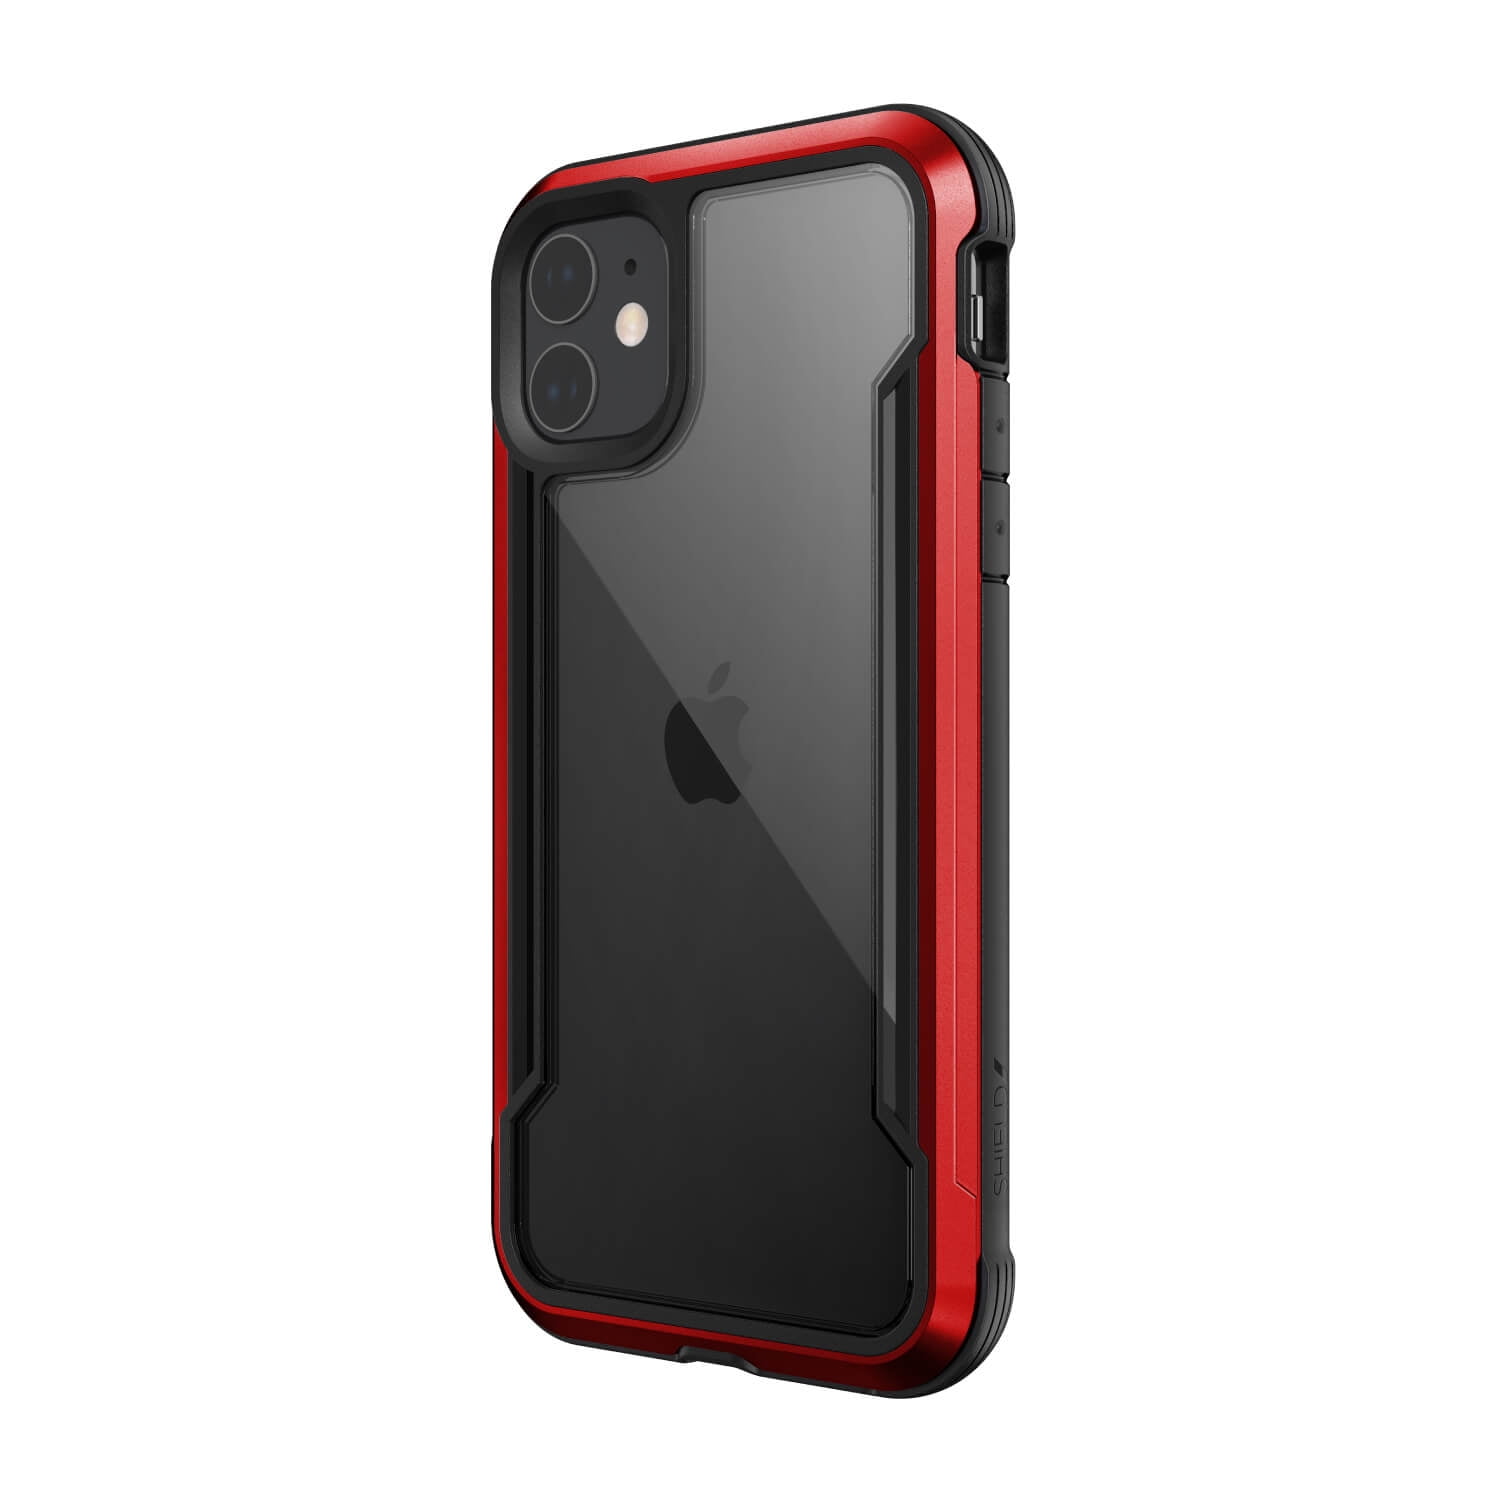 Raptic Shield Case Compatible with iPhone 11 Case, Shock Absorbing Protection, Durable Aluminum Frame, 10ft Drop Tested, Fits iPhone 11, Red